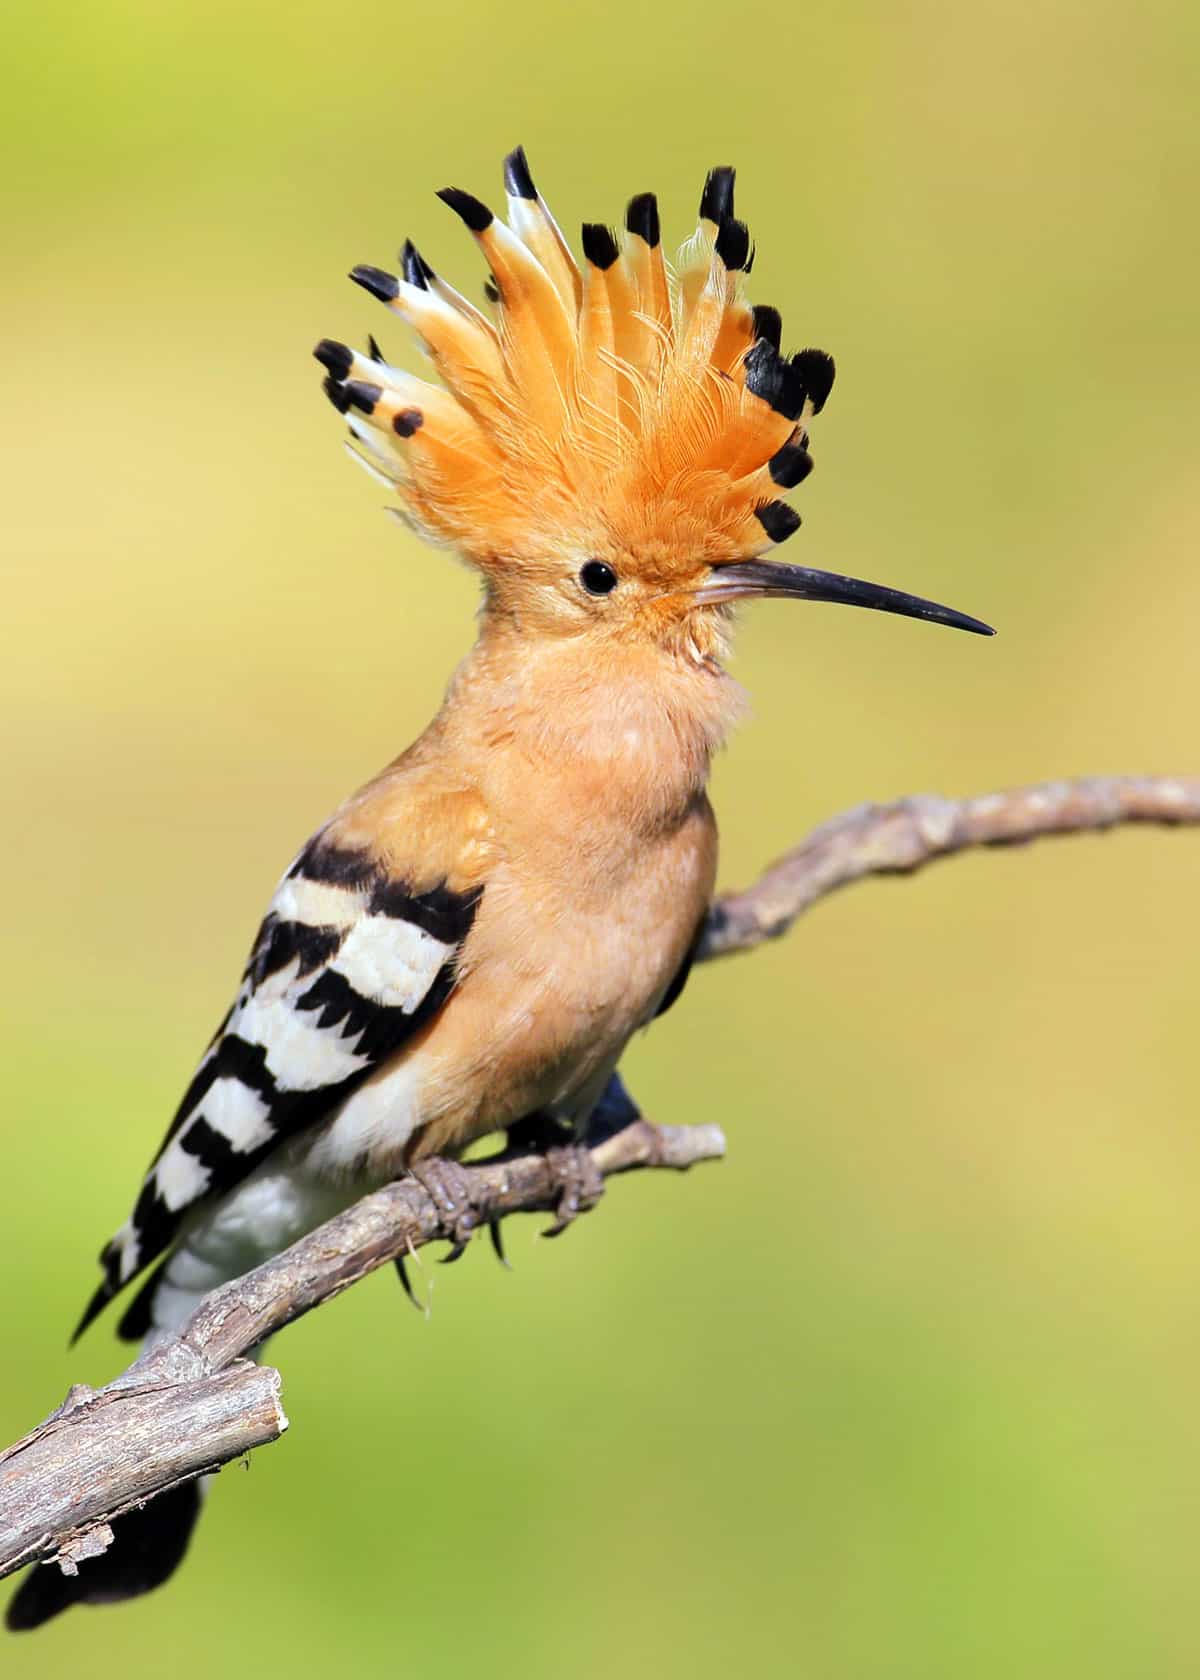 Facts about hoopoes